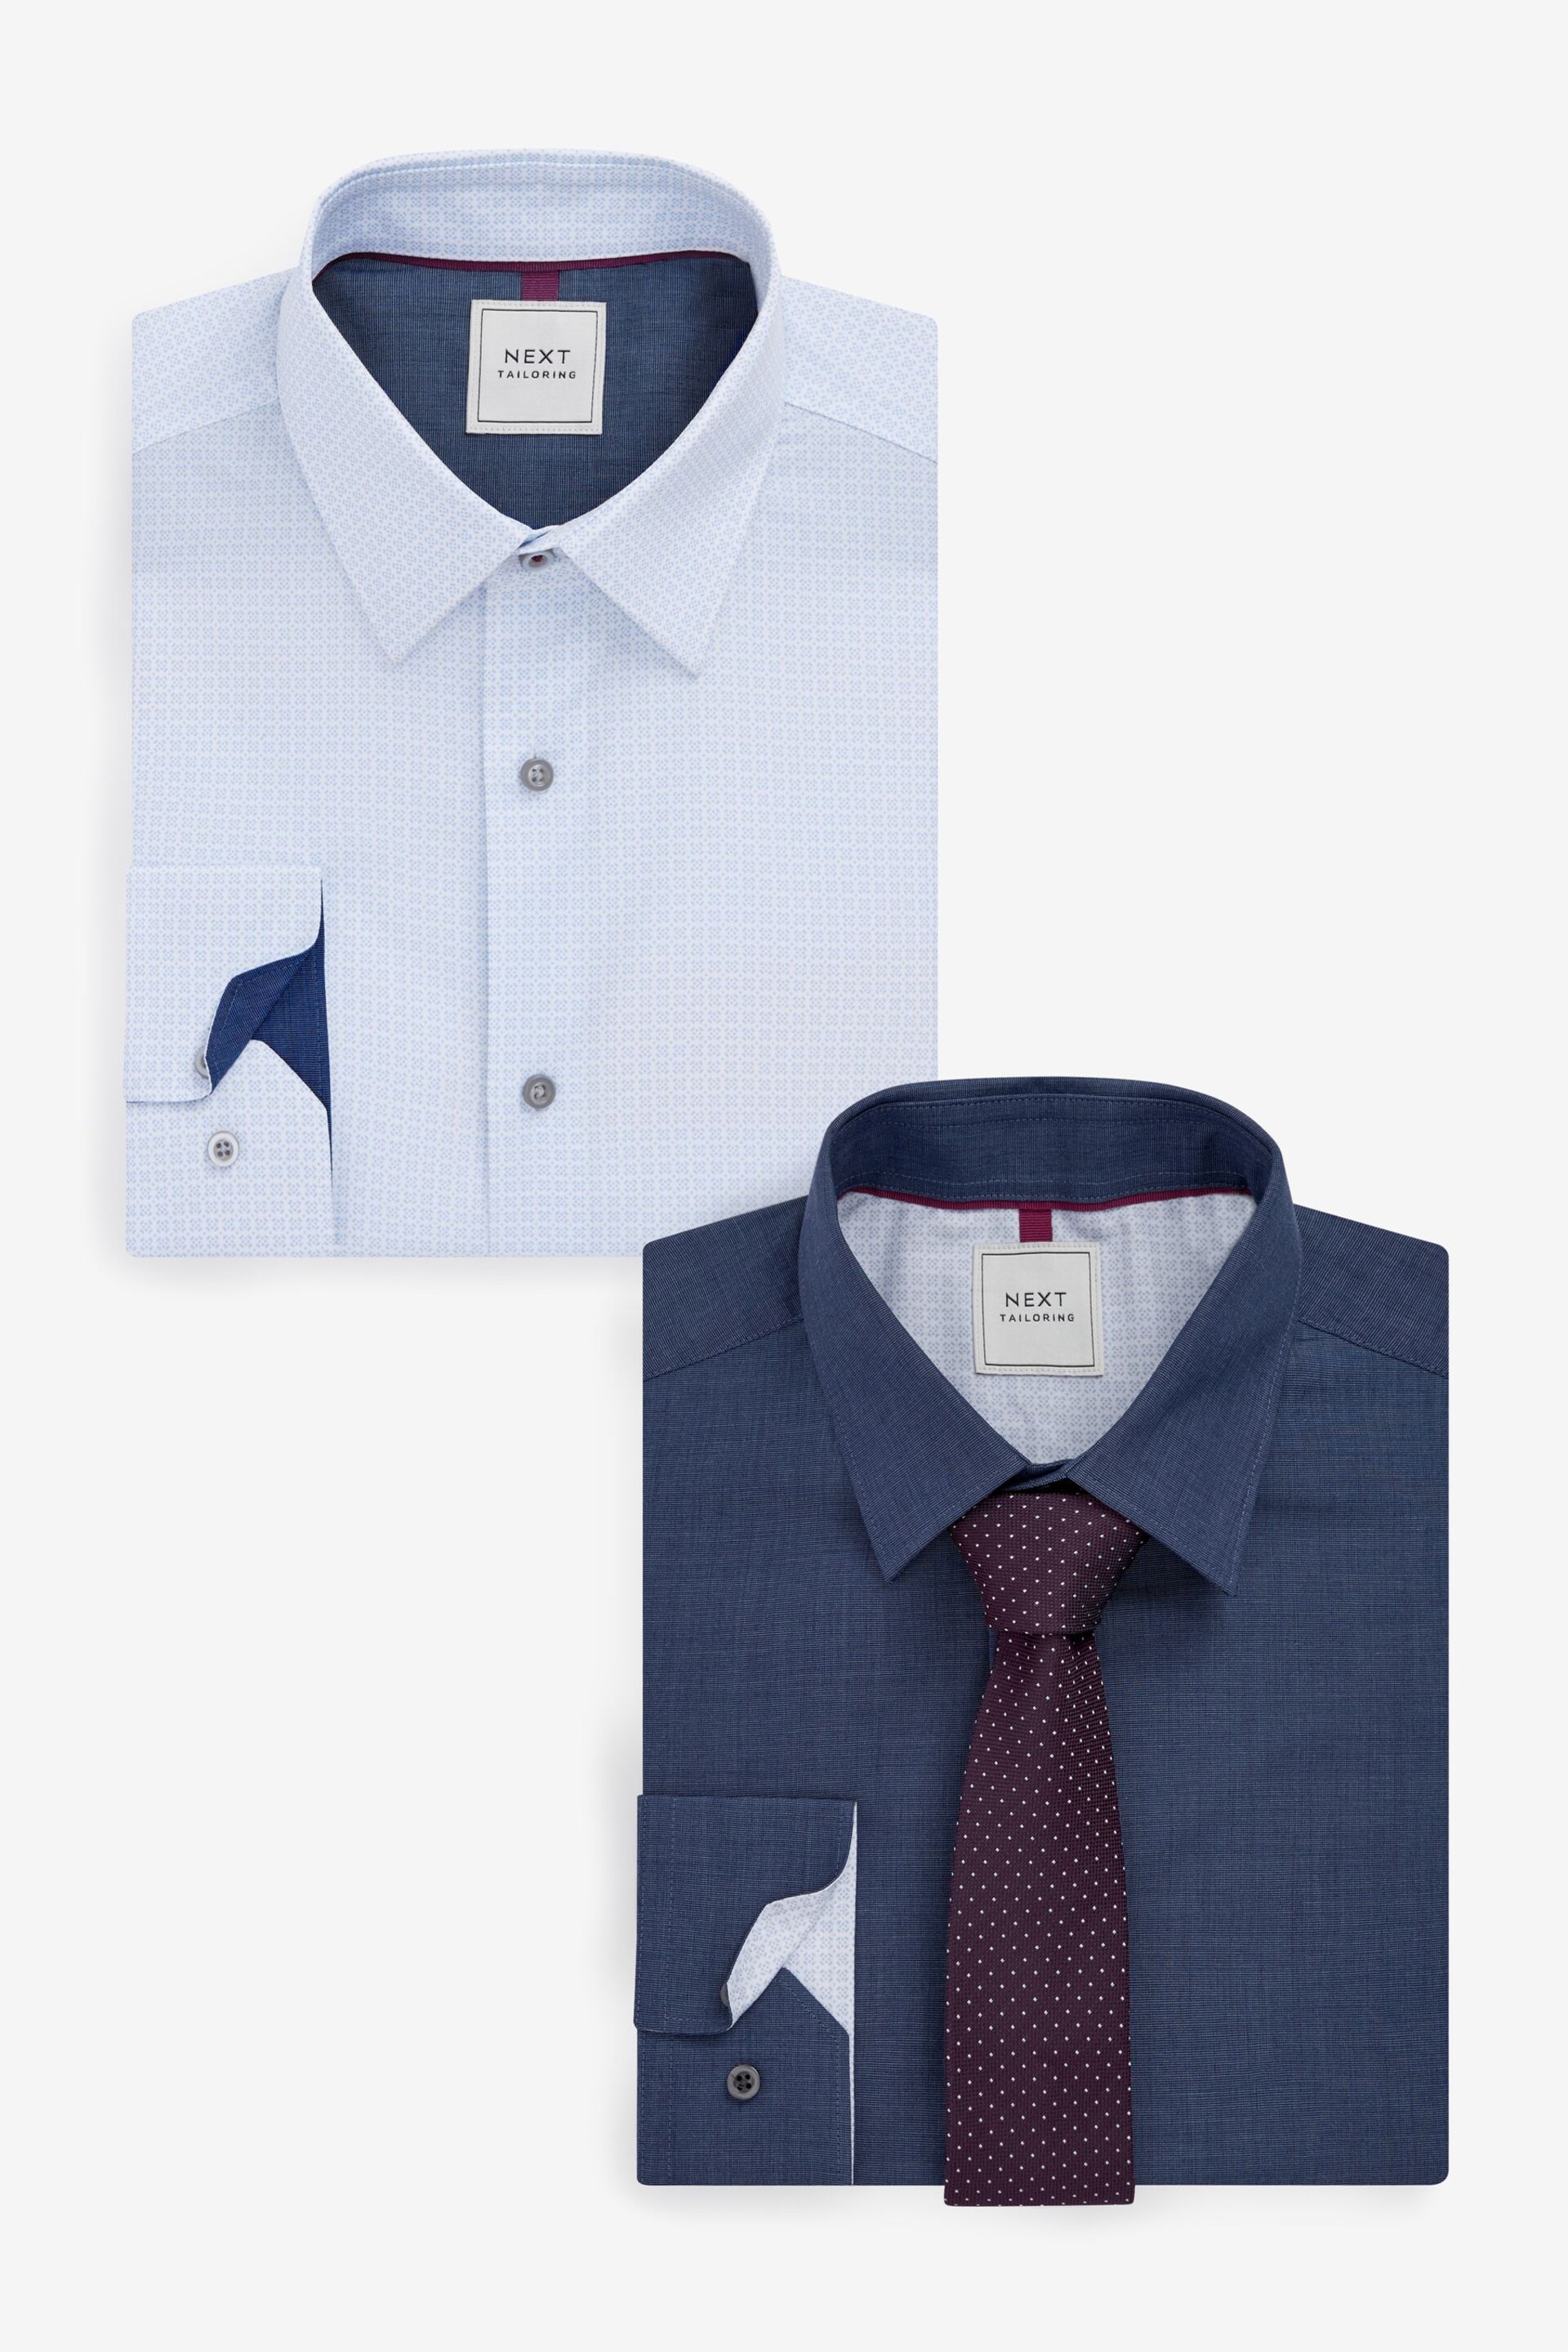 Blue Geometric Slim Fit Shirt And Tie Set 2 Pack - Image 1 of 19